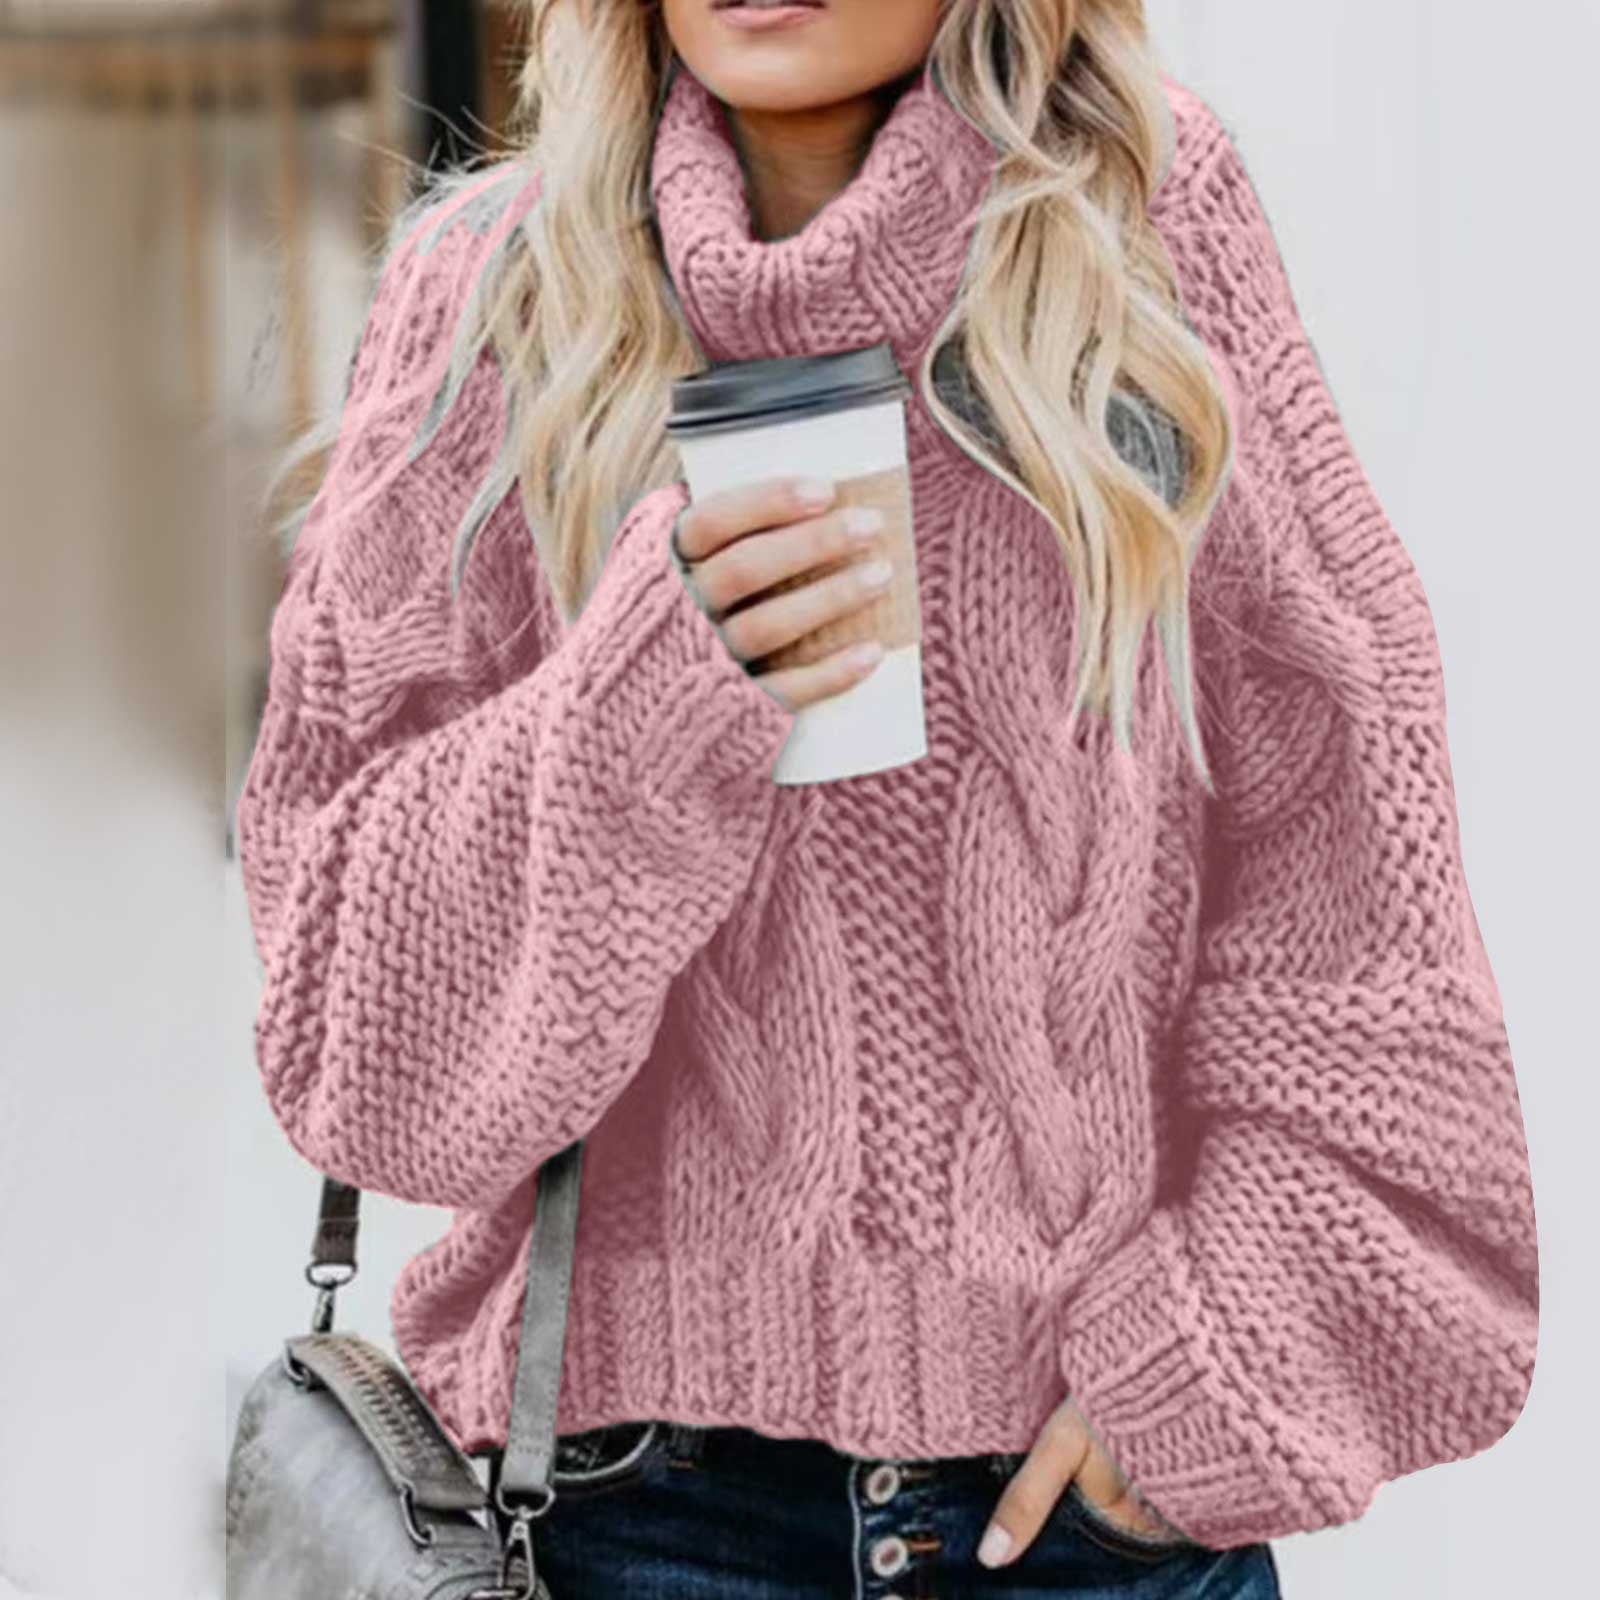 Women's Cable Knit Sweater